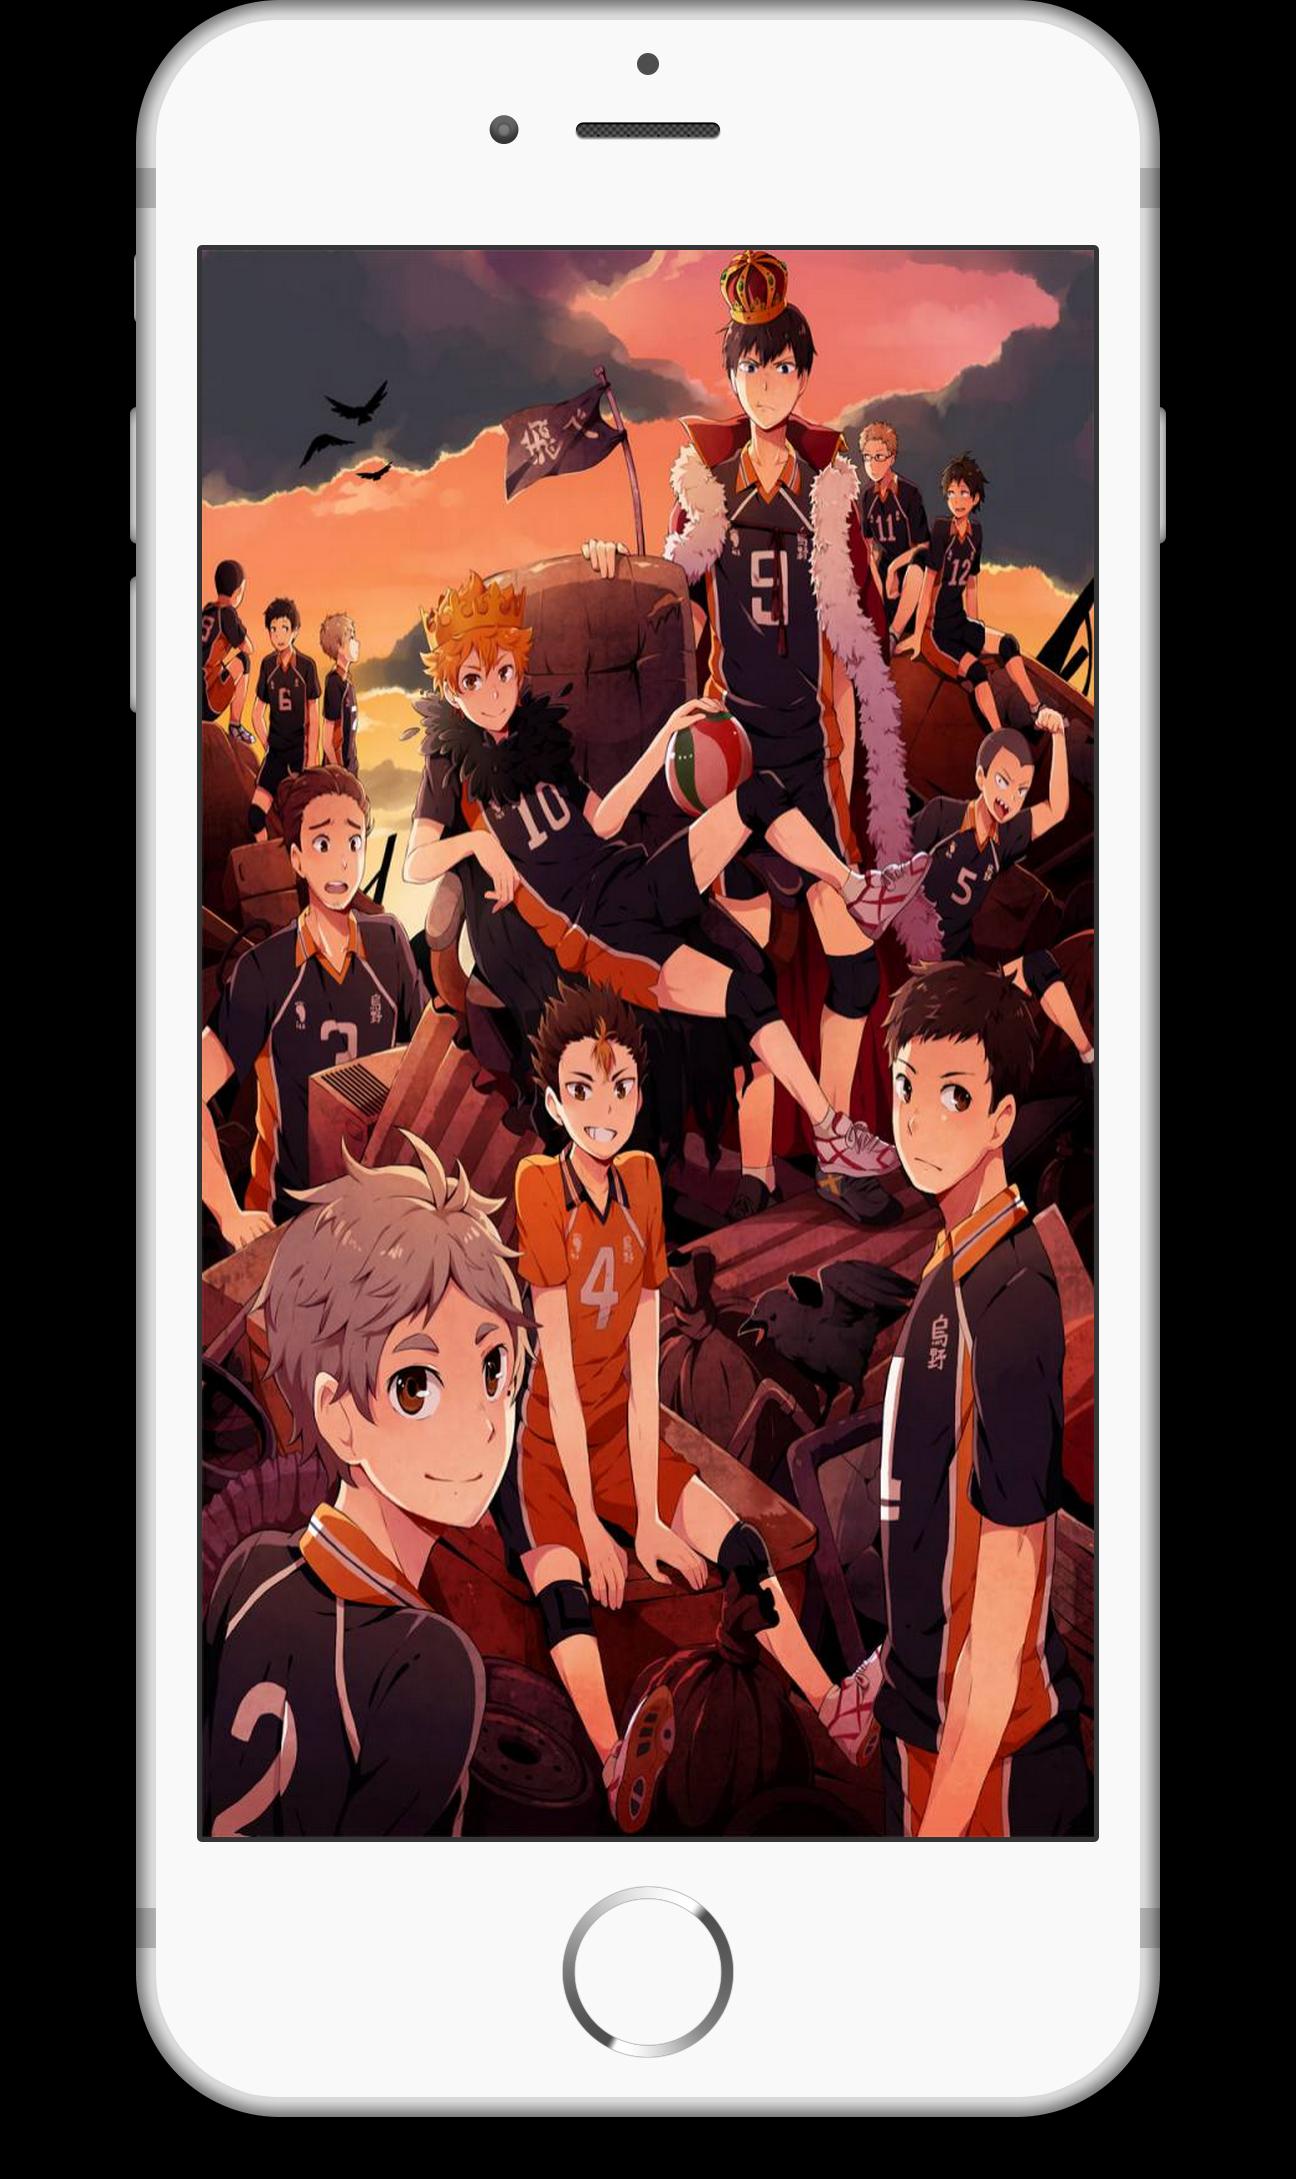 Haikyuu Anime Wallpapers 4K HD 2018 for Android - APK Download